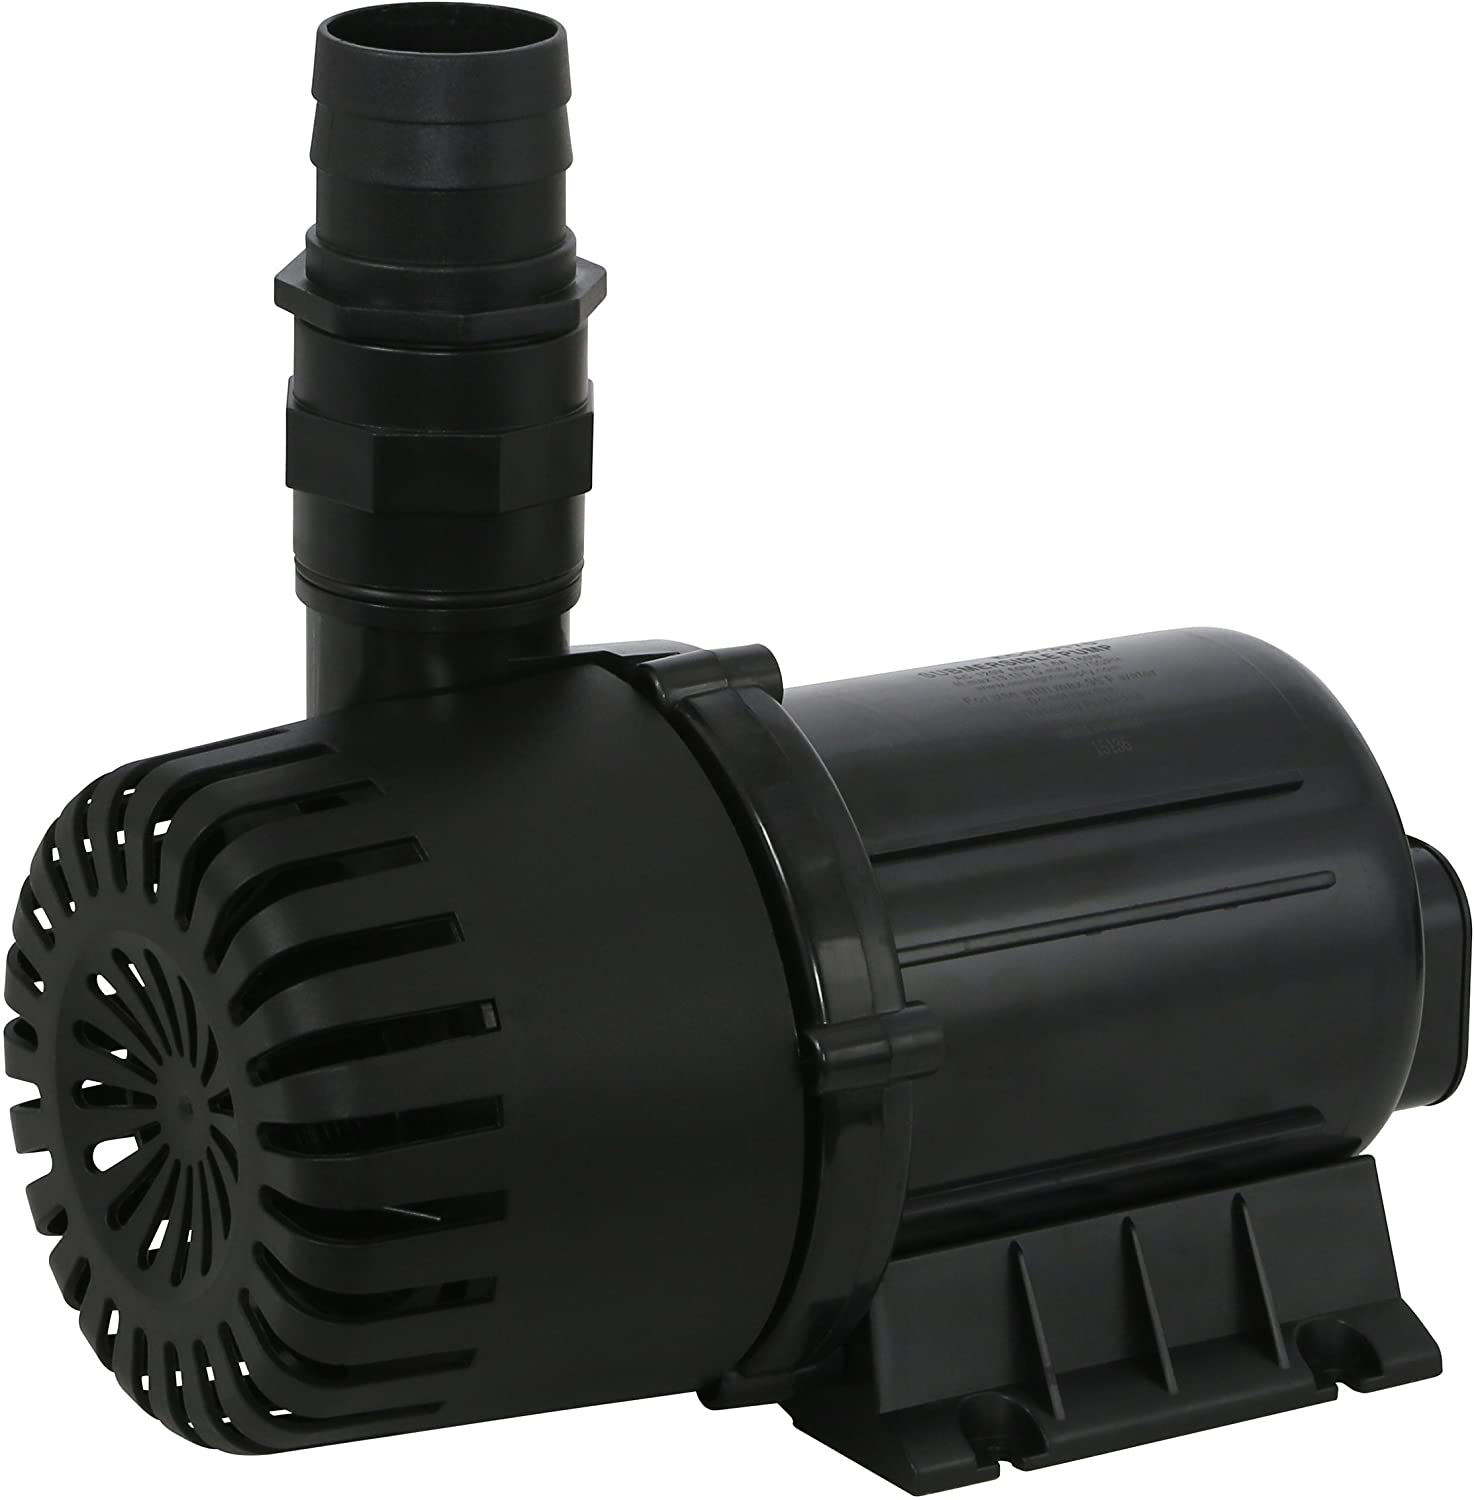 Ecoplus Eco 185 Water Pump Fixed Flow Submersible or Inline for Aquariums, Ponds, Fountains & Hydroponics - UL Listed, 158 GPH, Black Animals & Pet Supplies > Pet Supplies > Fish Supplies > Aquarium & Pond Tubing Ecoplus Ink Fixed Flow 3170 GPH 